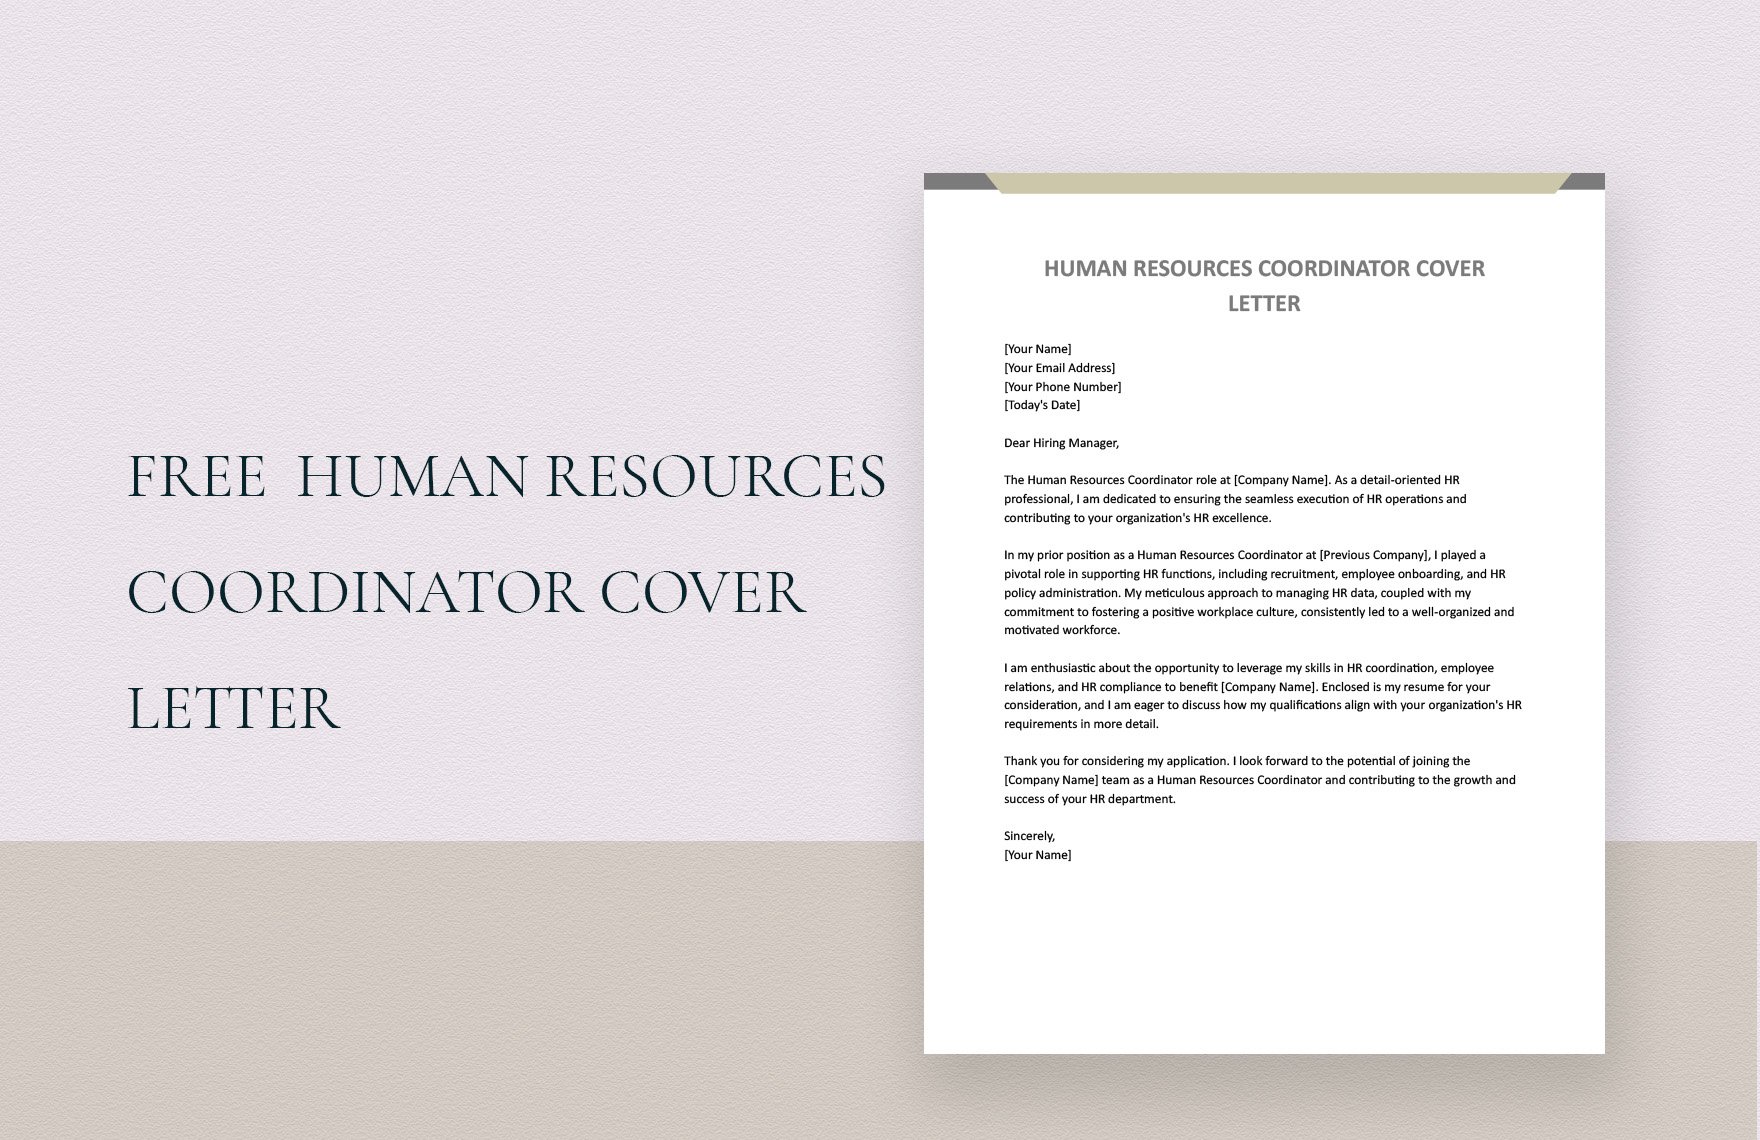 Human Resources Coordinator Cover Letter